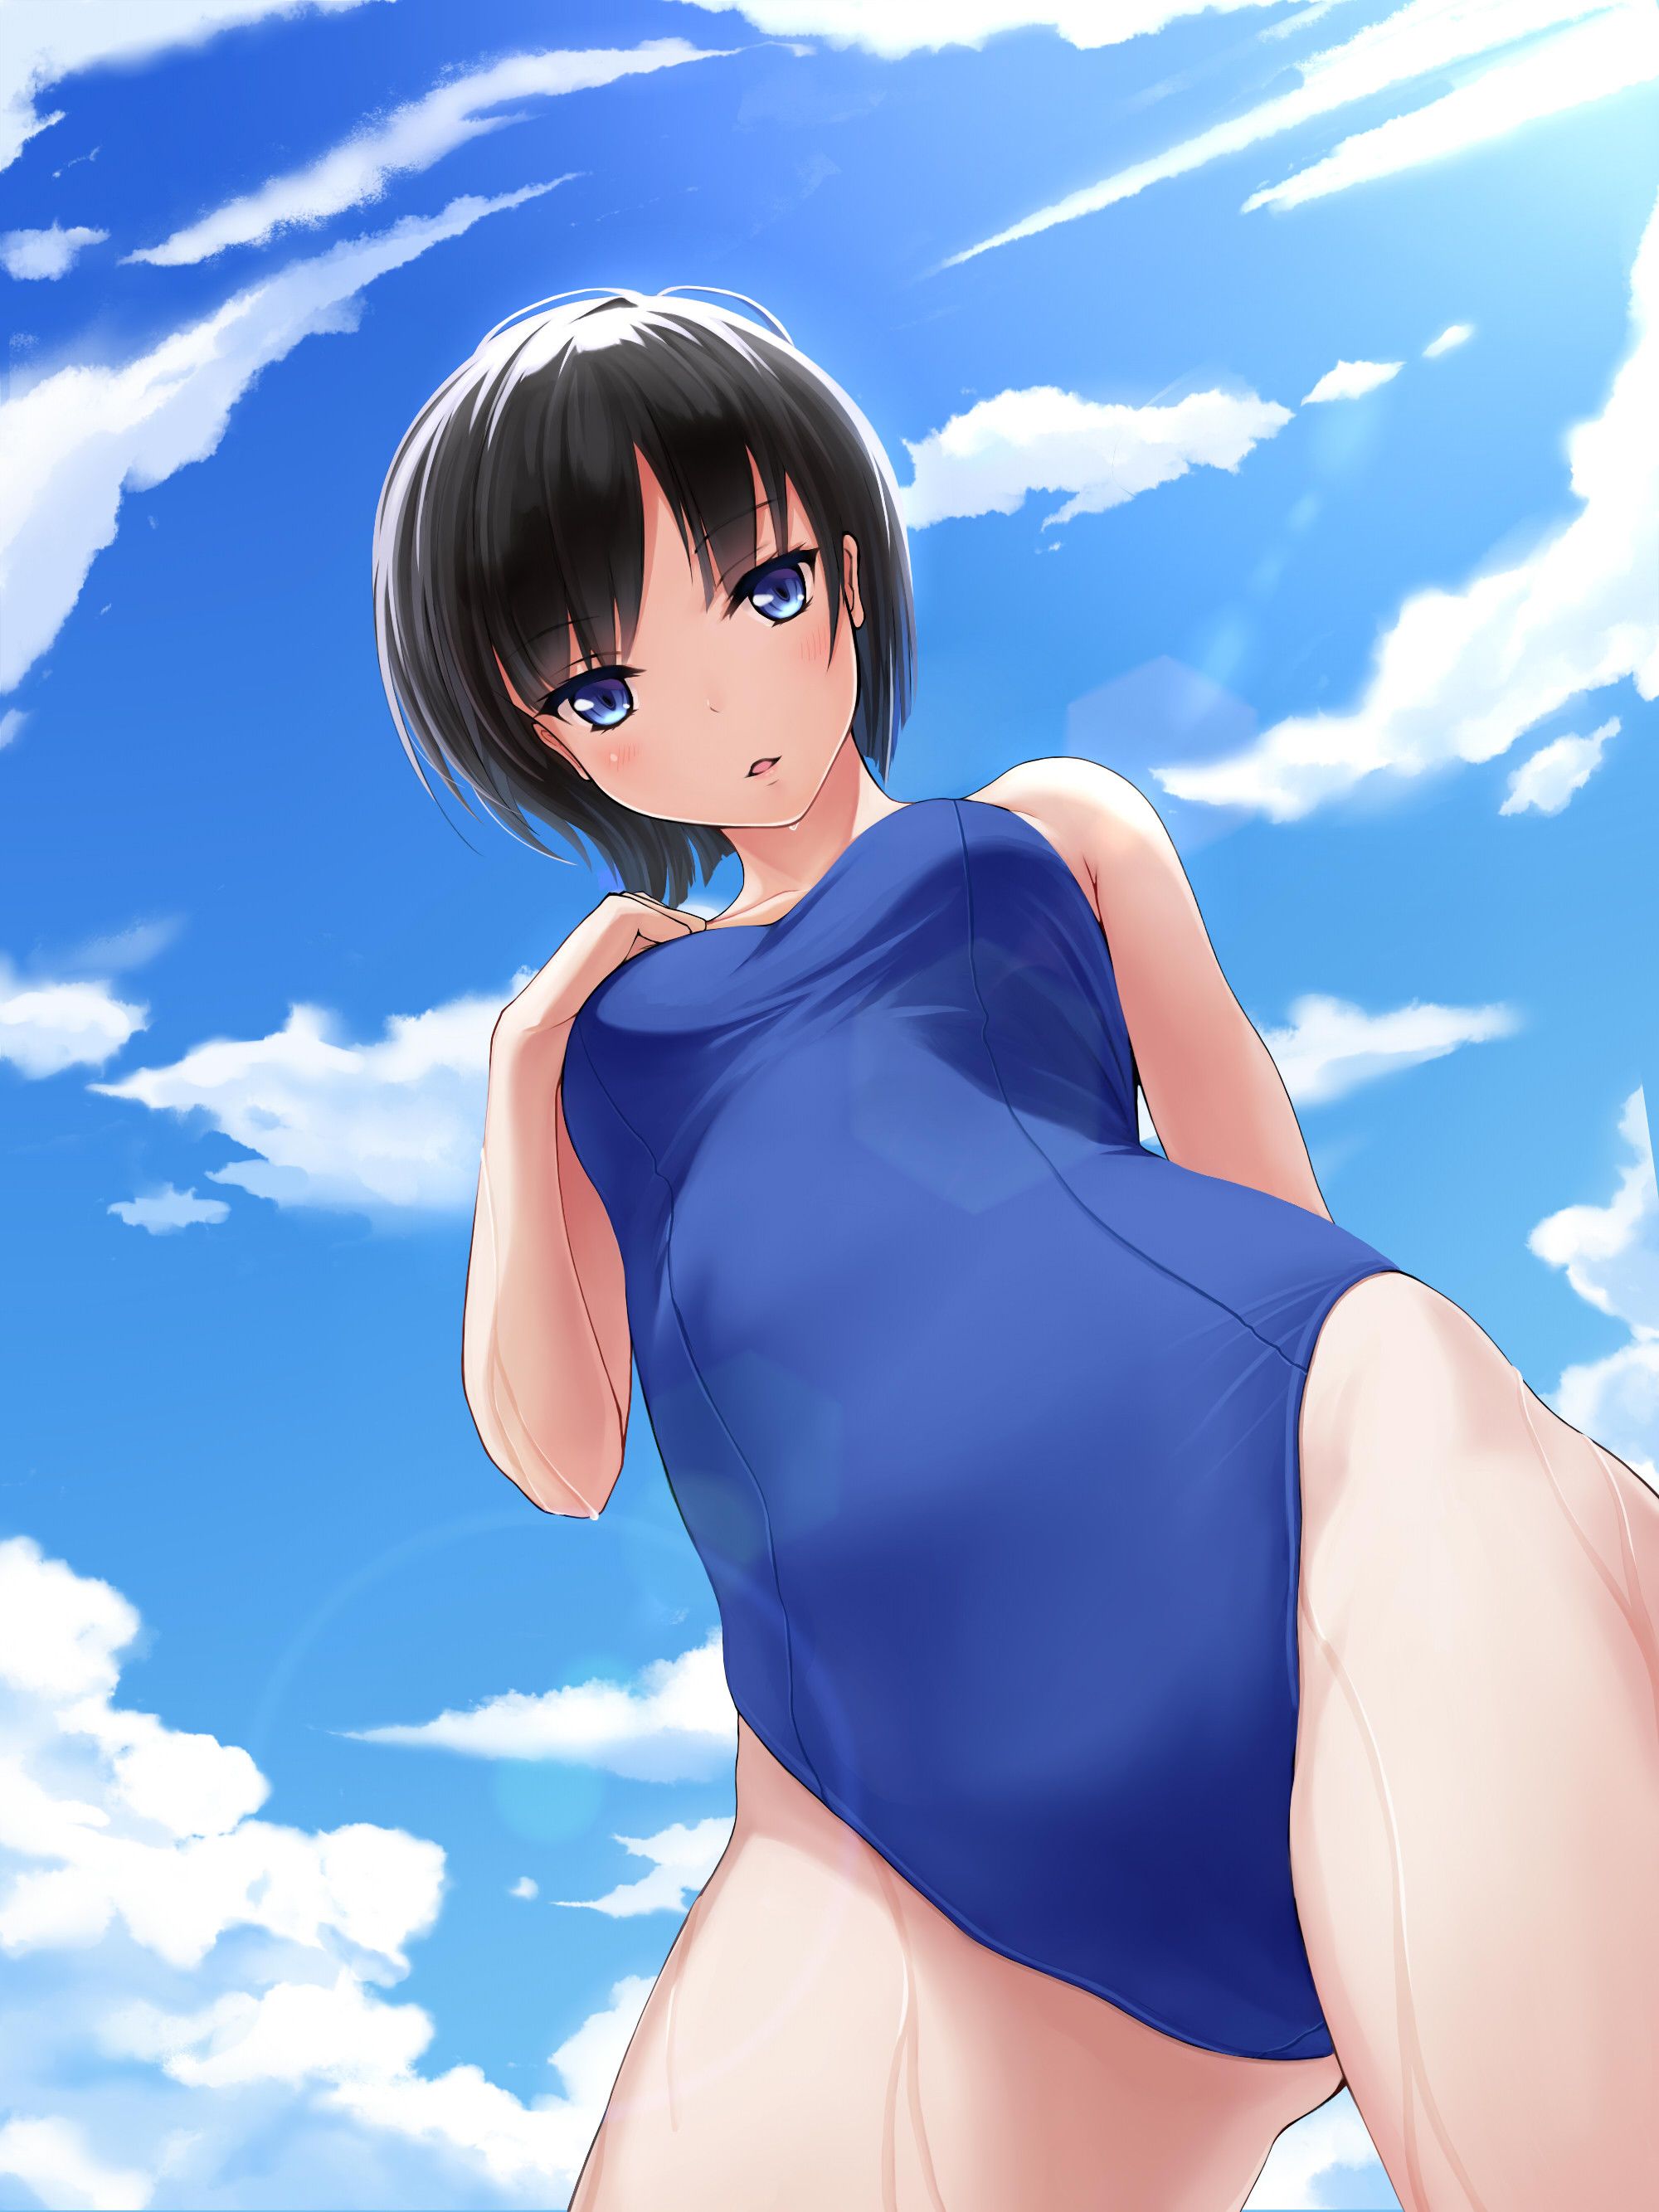 I want the image that is erotic thing in the swimsuit, please!!! 12